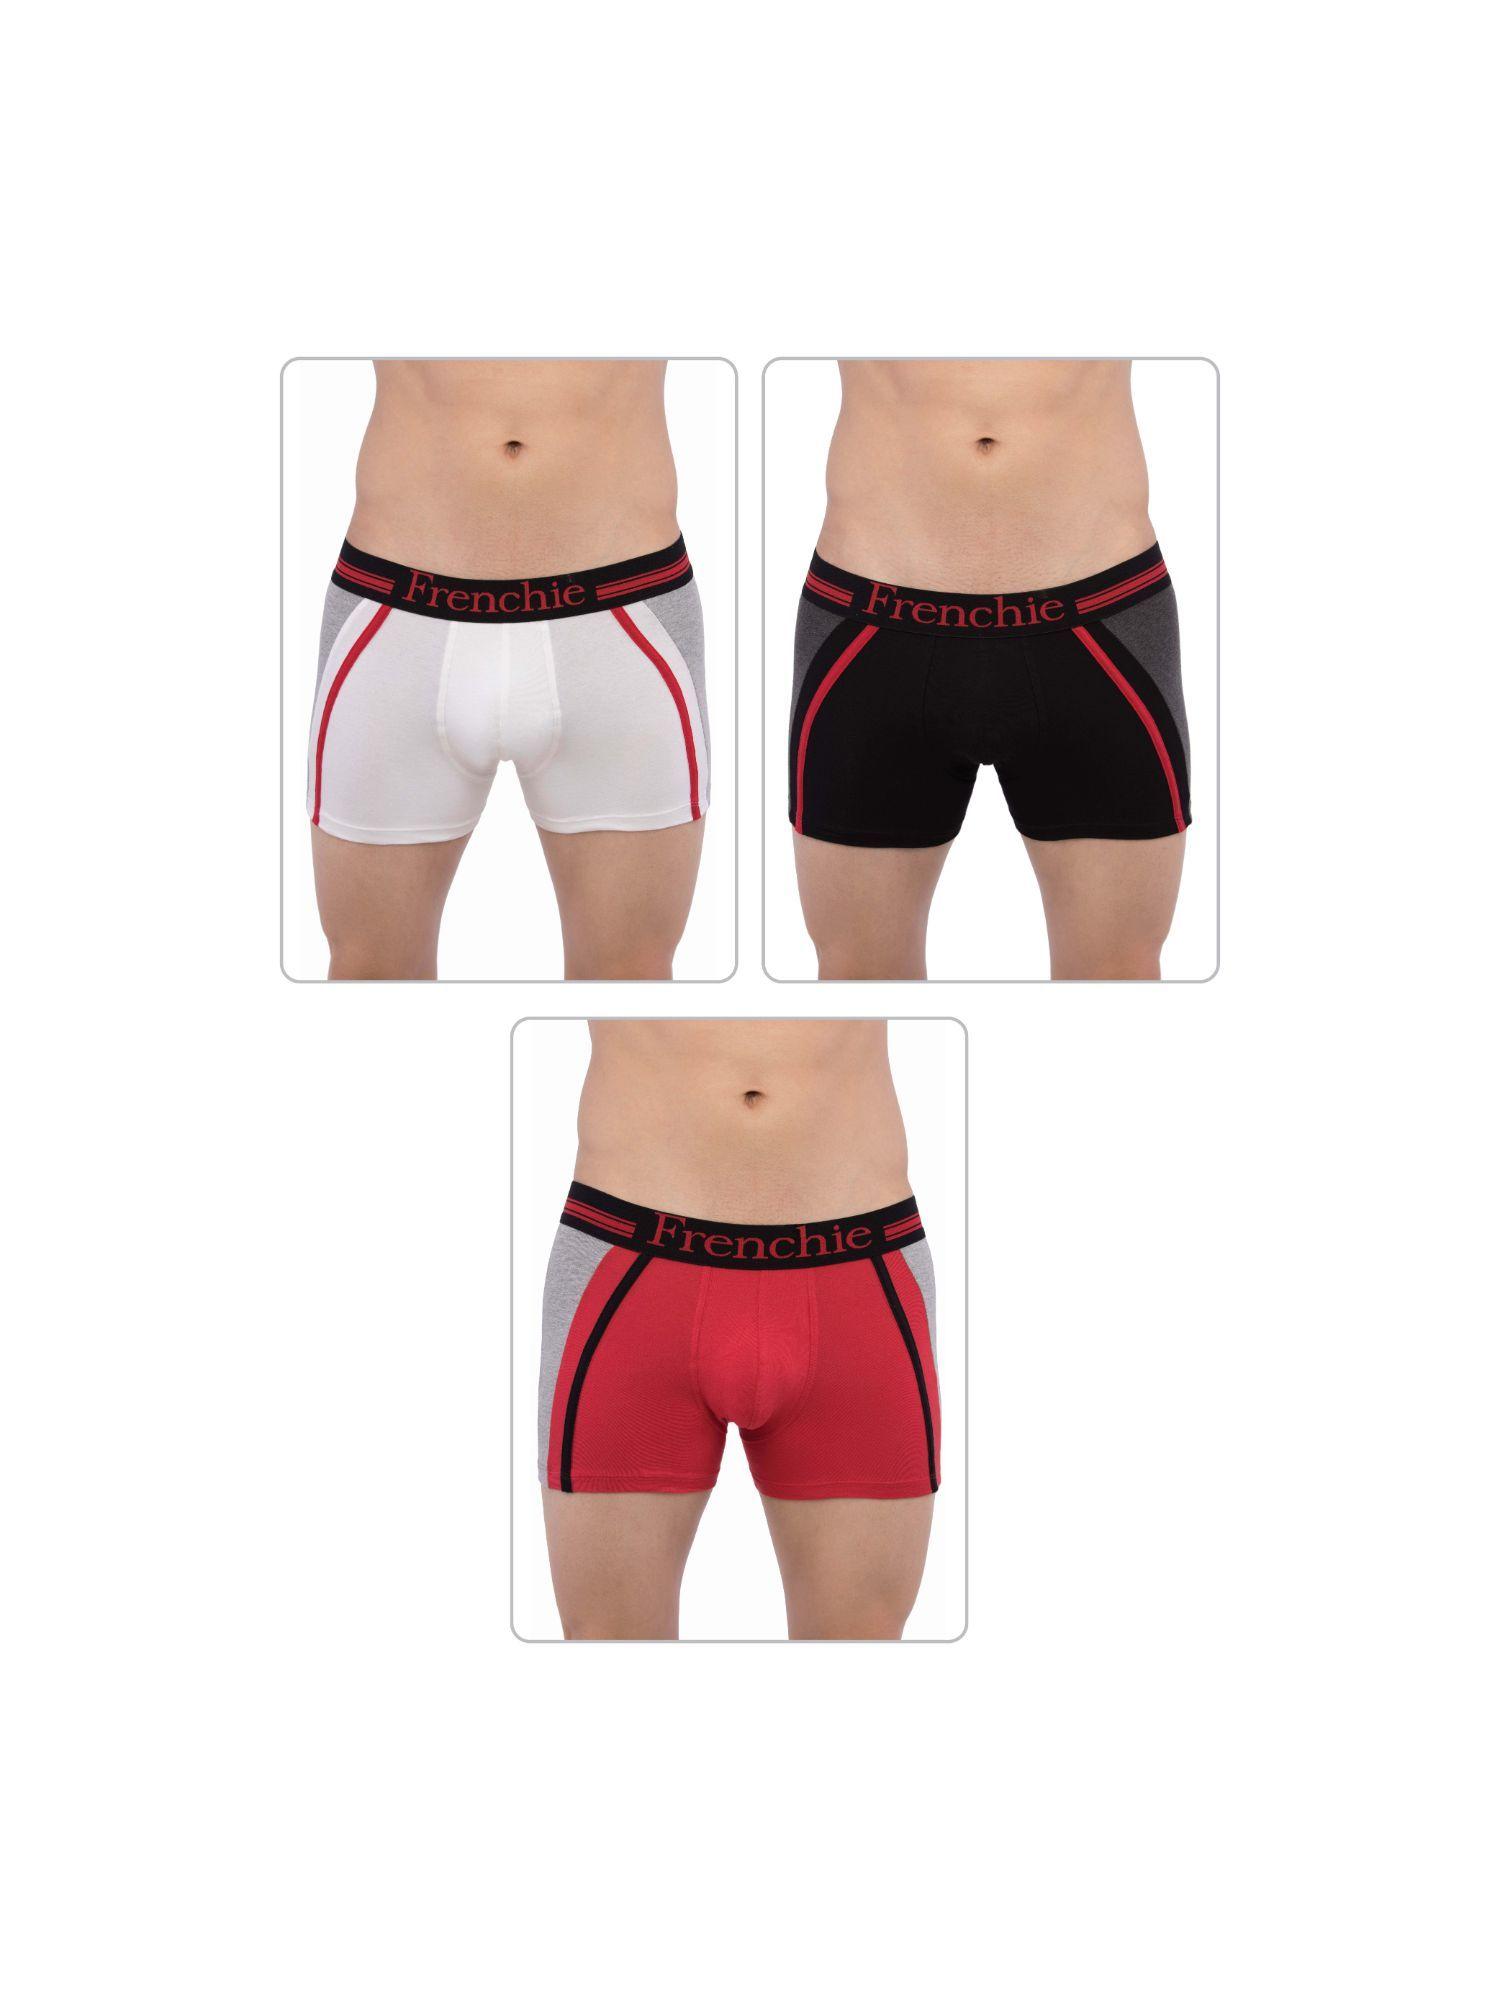 mens casual 4300 cotton trunks - assorted colours (pack of 3)